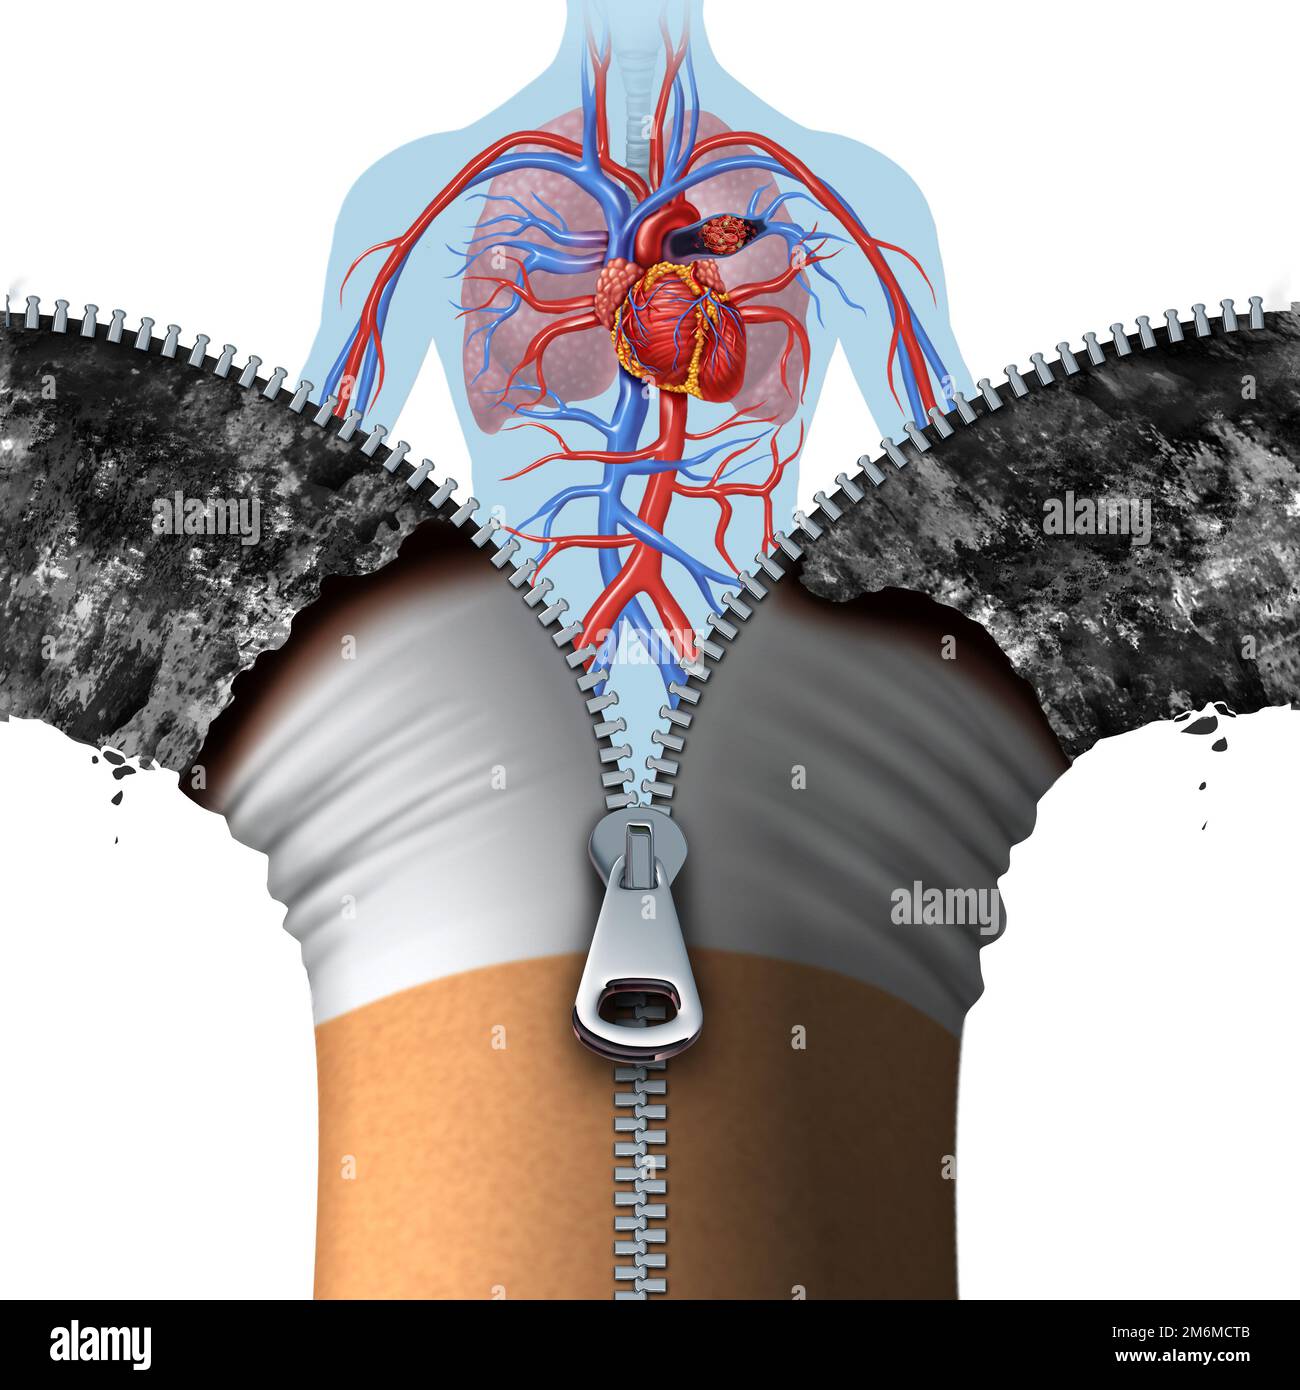 Cigarette and And Cardiovascular concept and anti smoking symbol as a tobacco product opened with a 3D illustration zipper and a healthy human heart Stock Photo